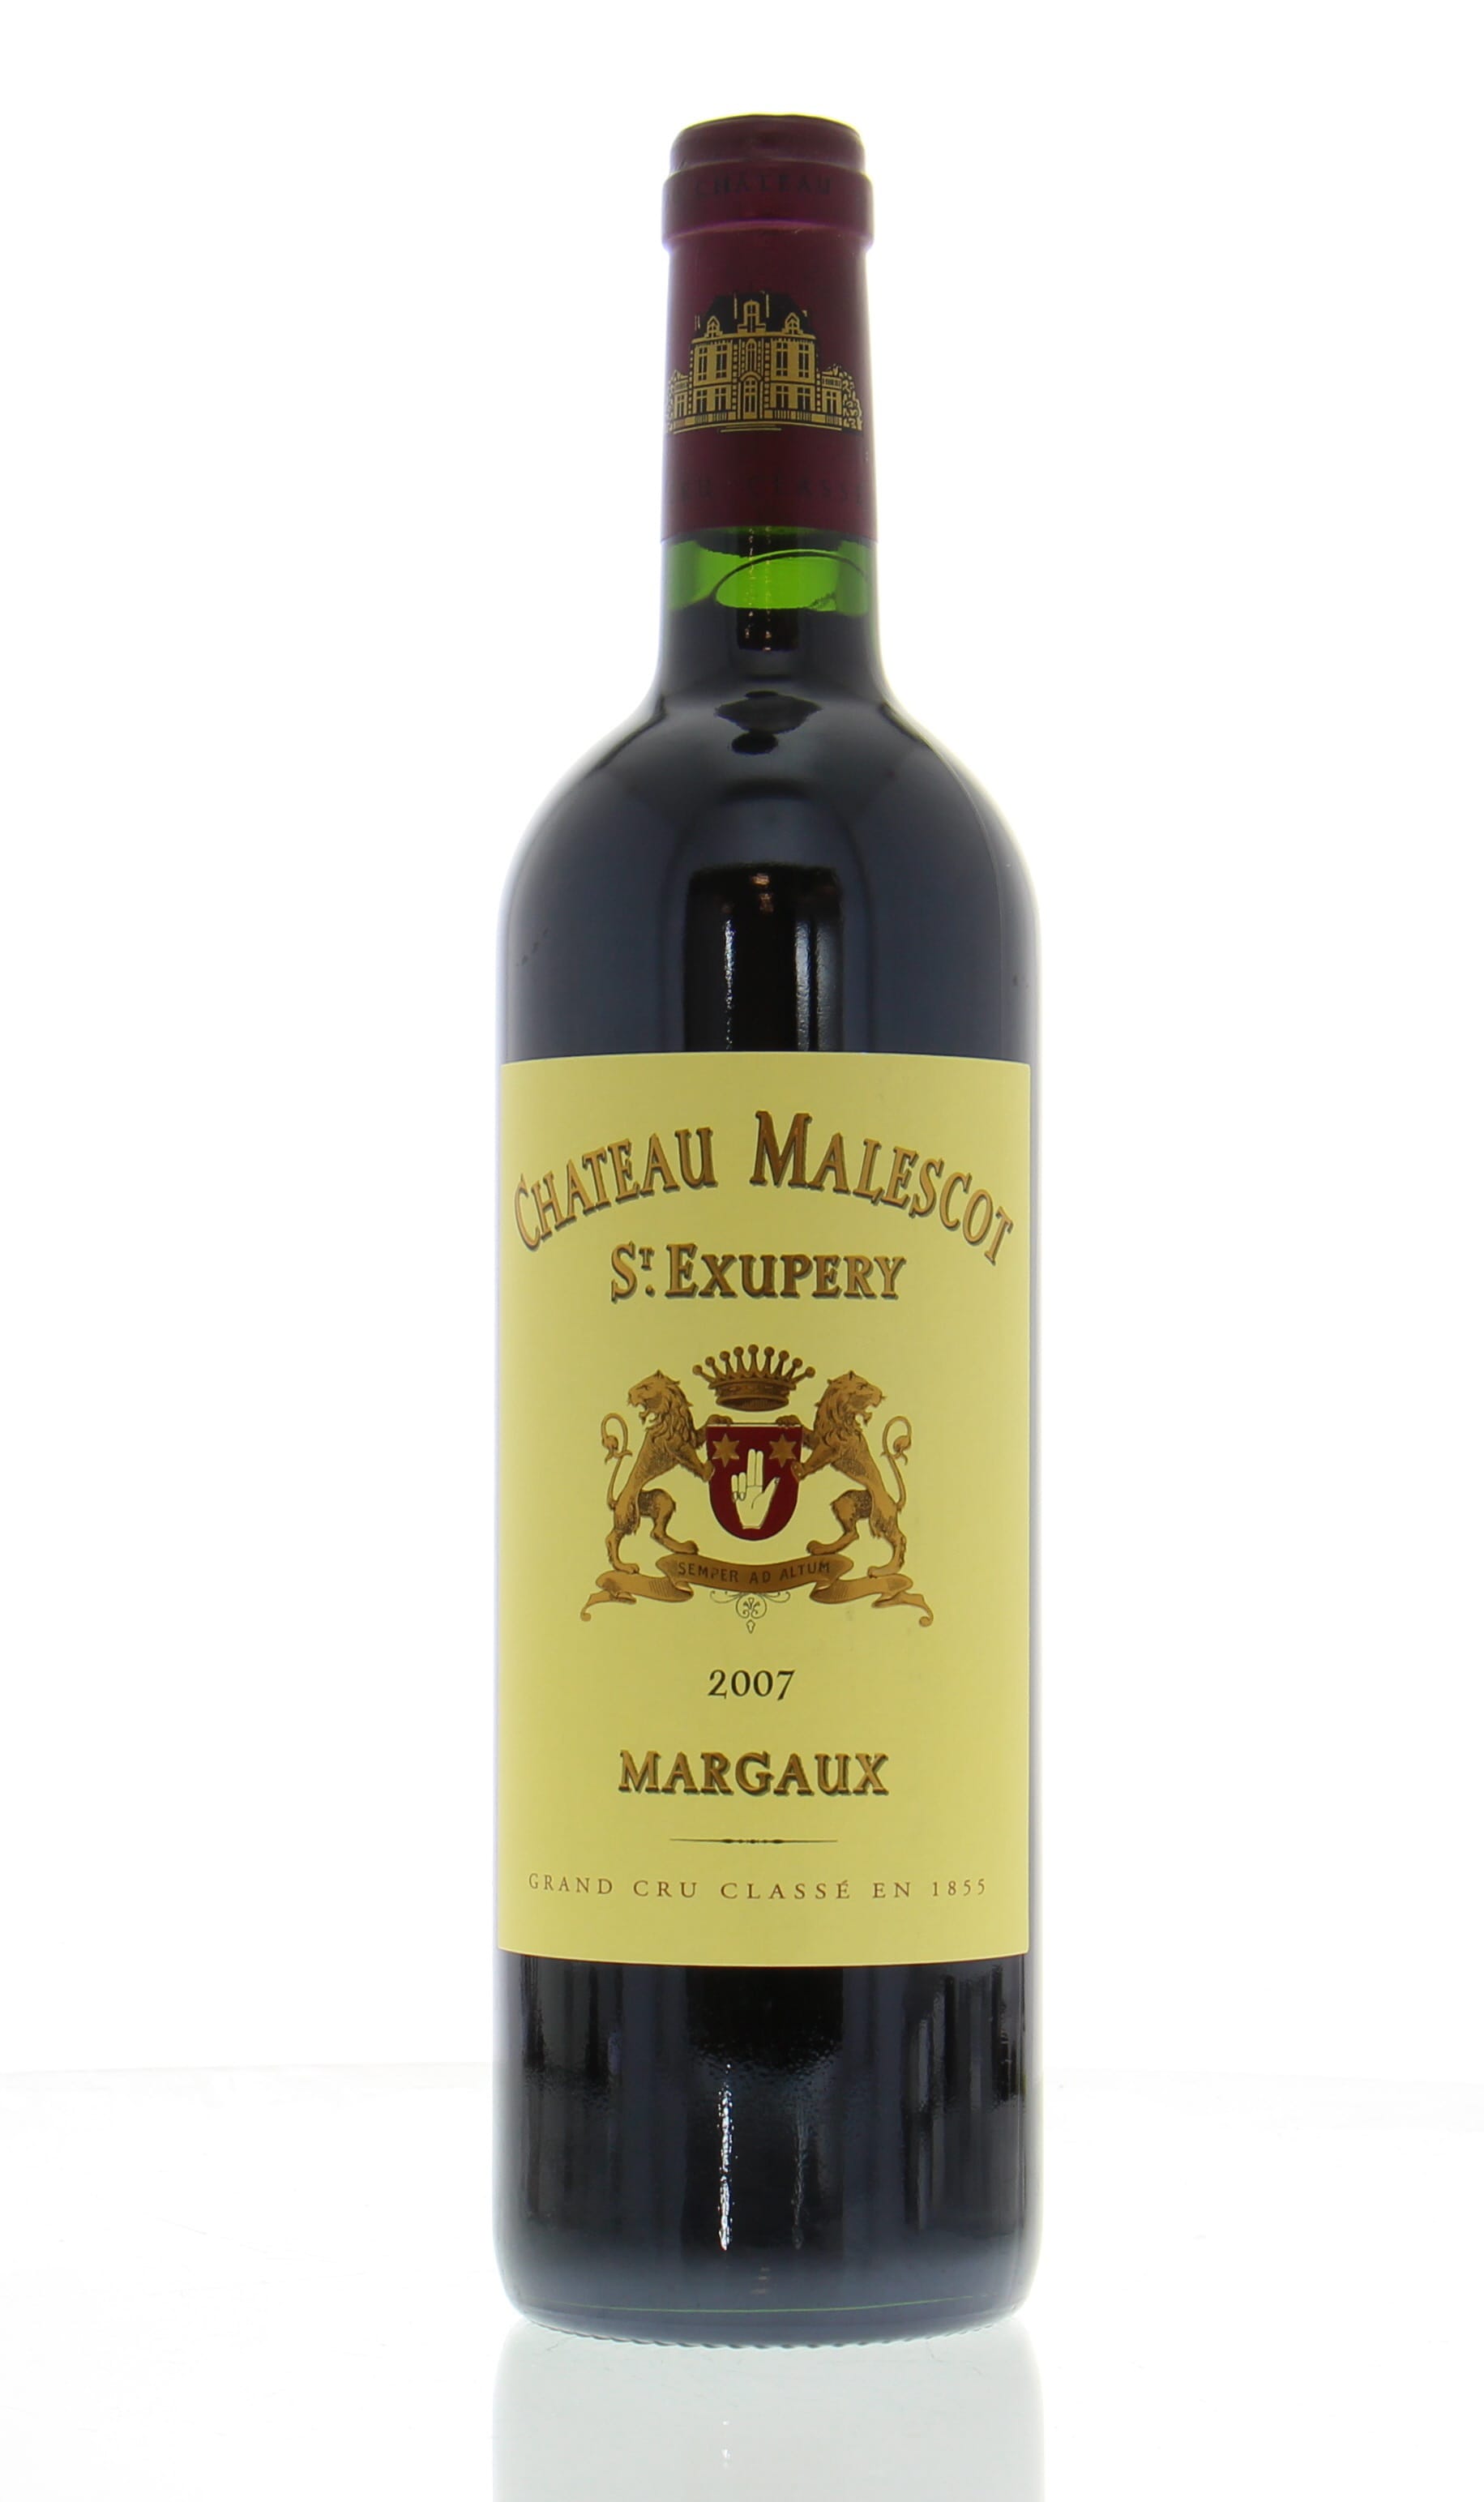 Chateau Malescot-St-Exupery - Chateau Malescot-St-Exupery 2007 Perfect